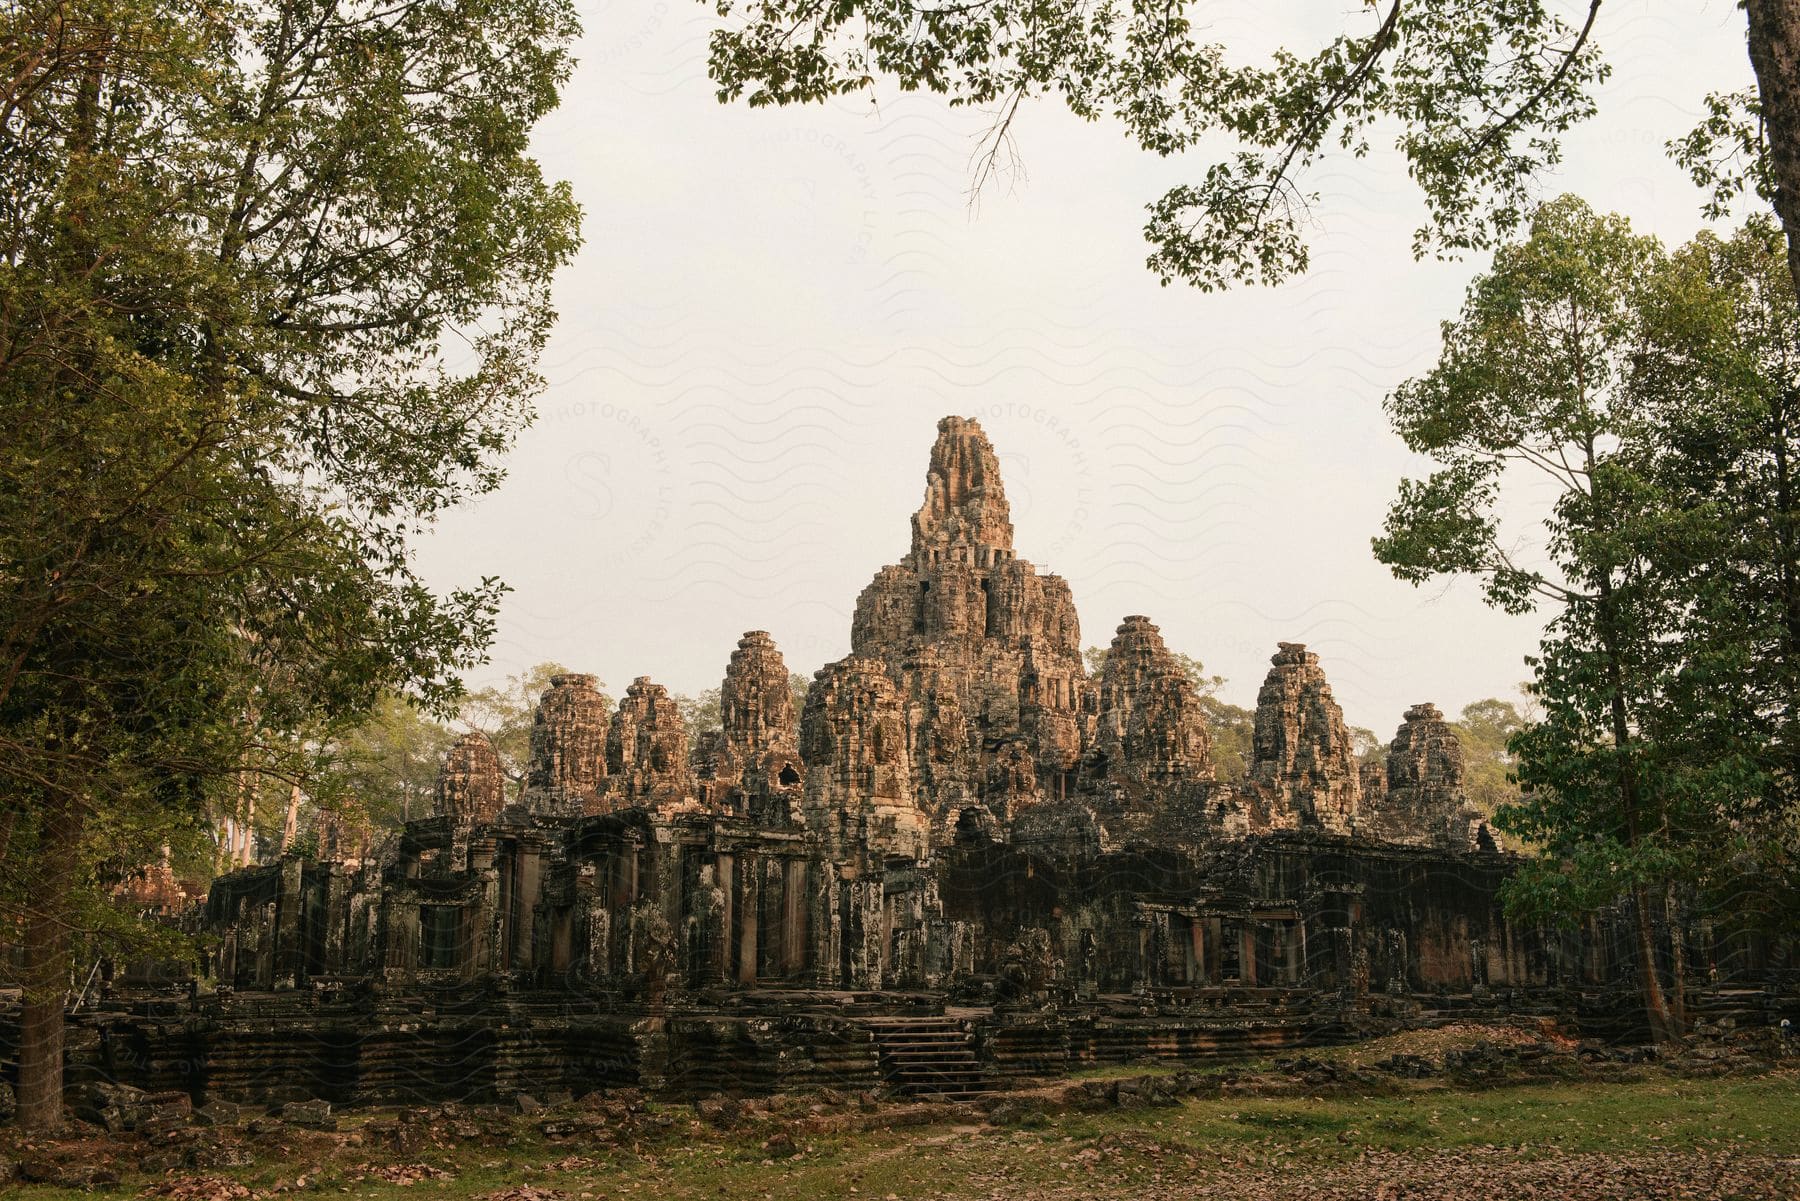 Bayon temple surrounded by trees in the forest